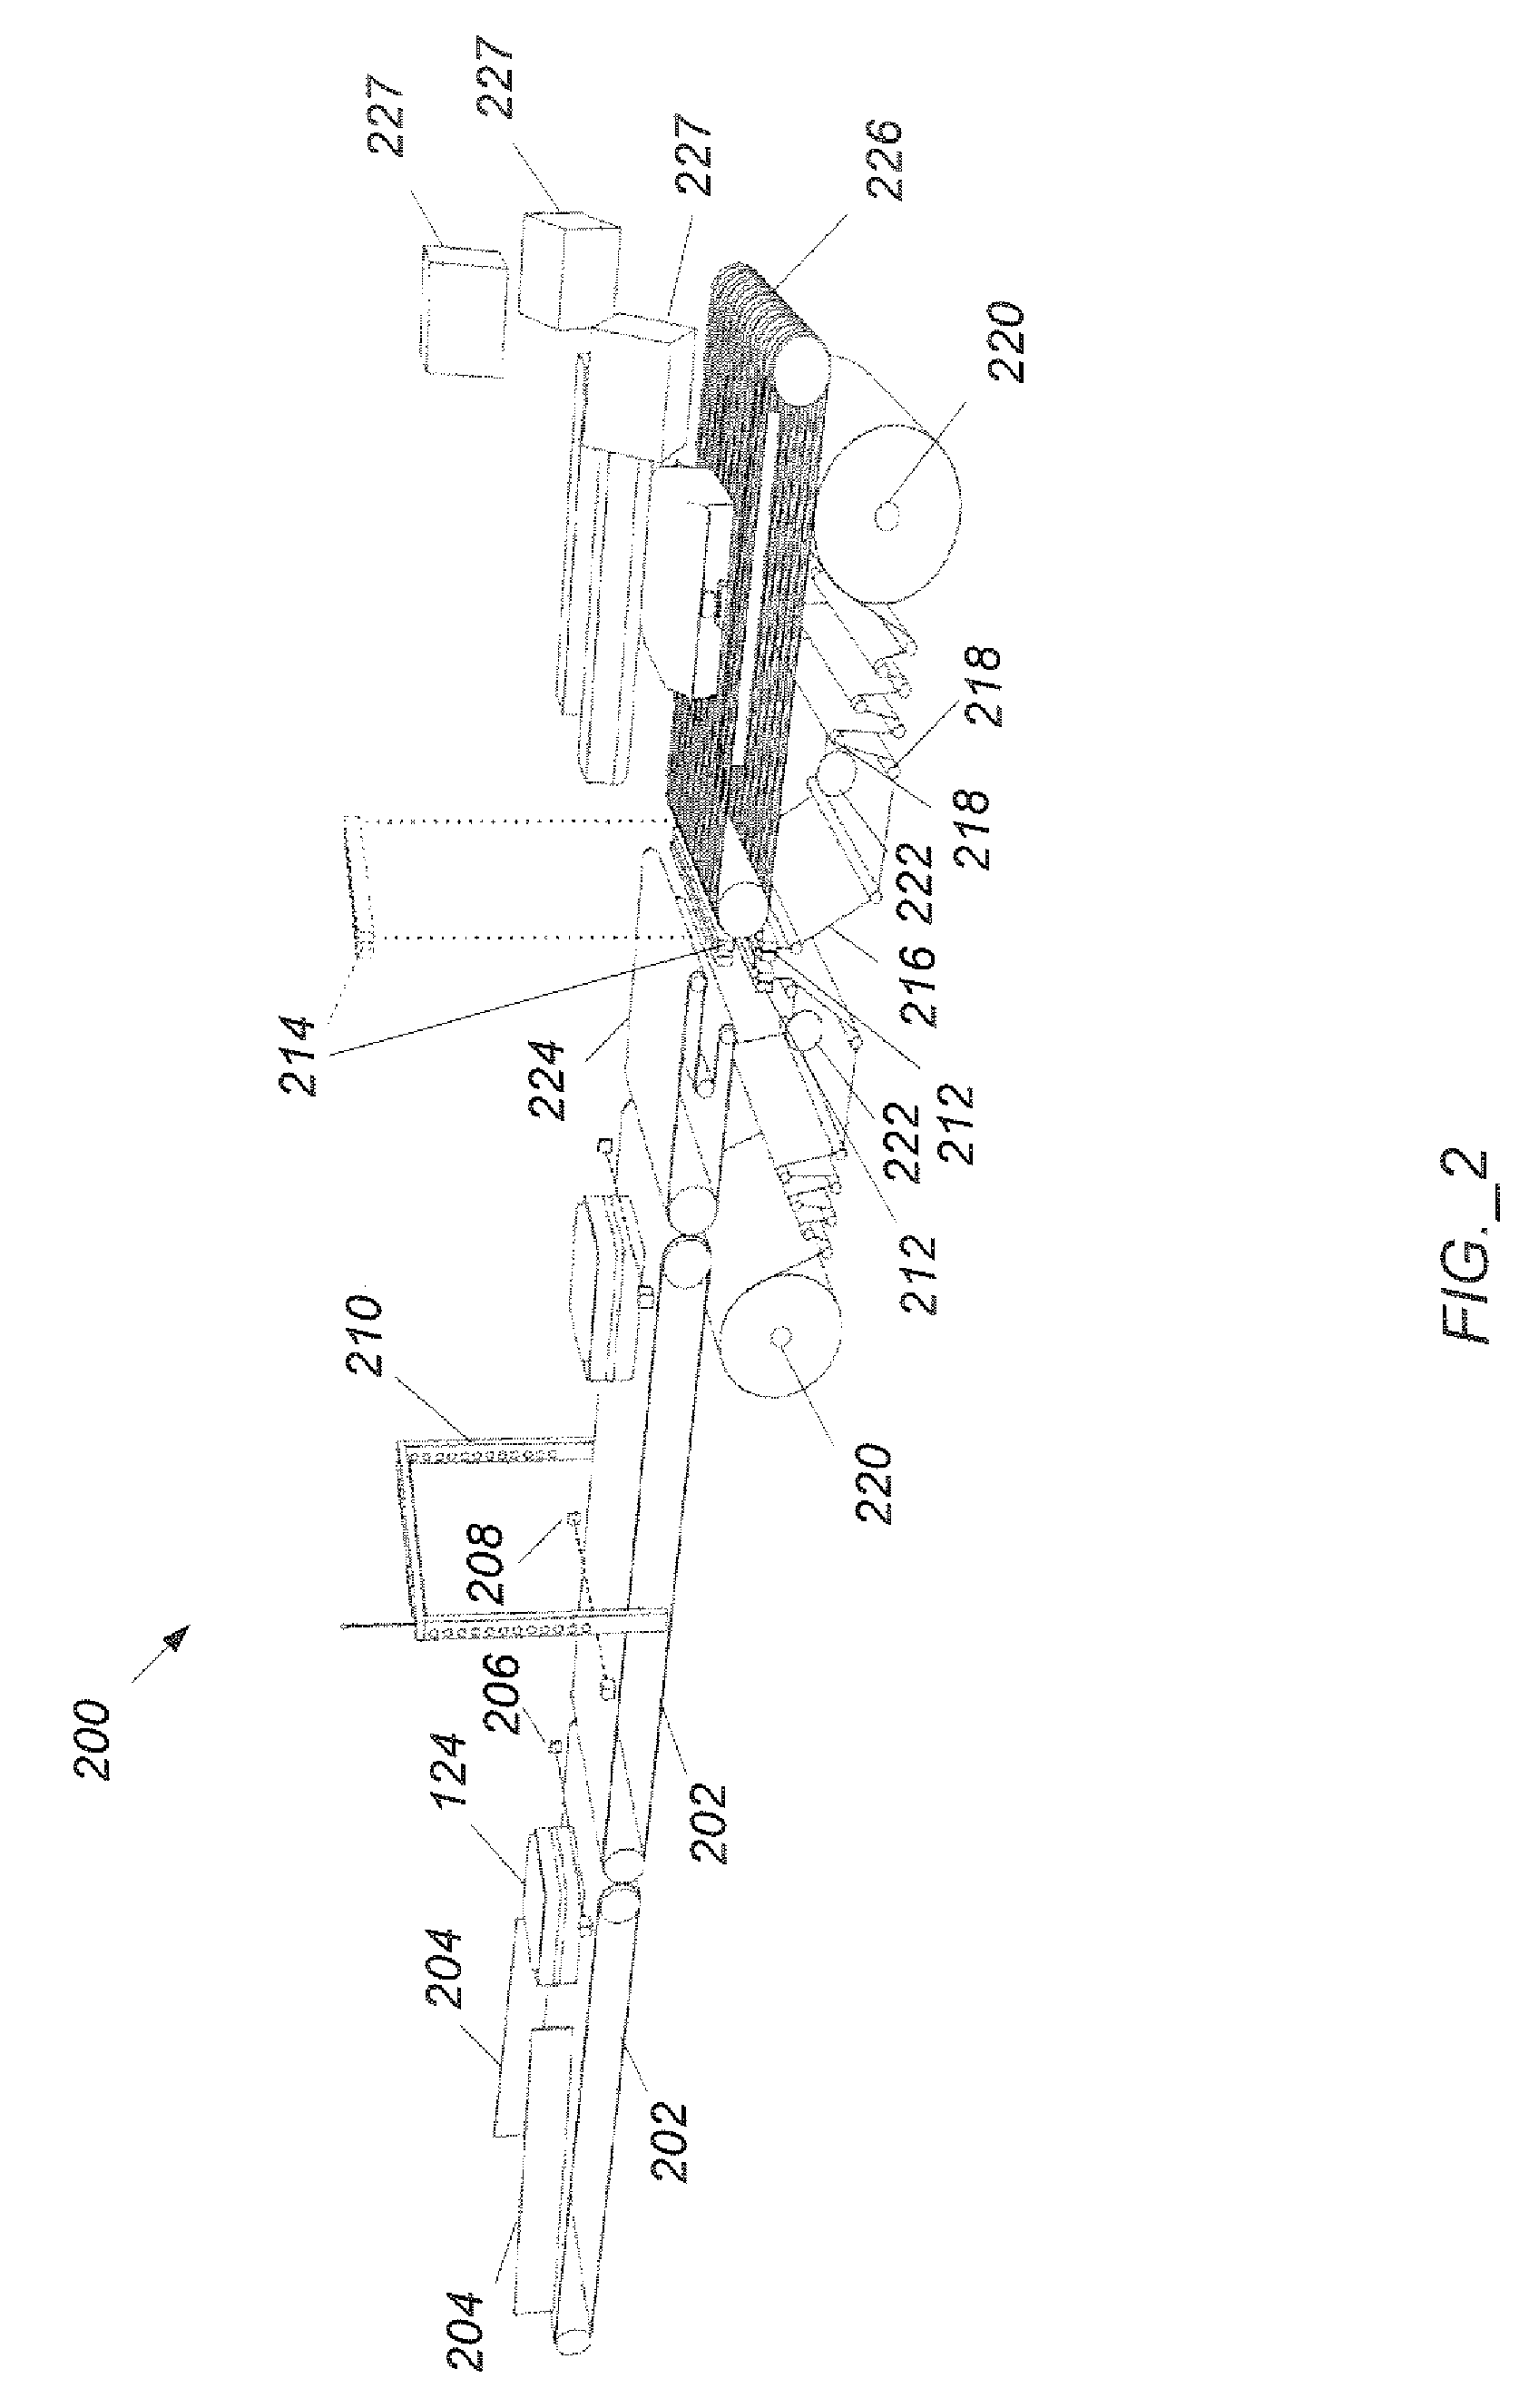 Method and apparatus for preventing luggage mishandling in public transportation systems